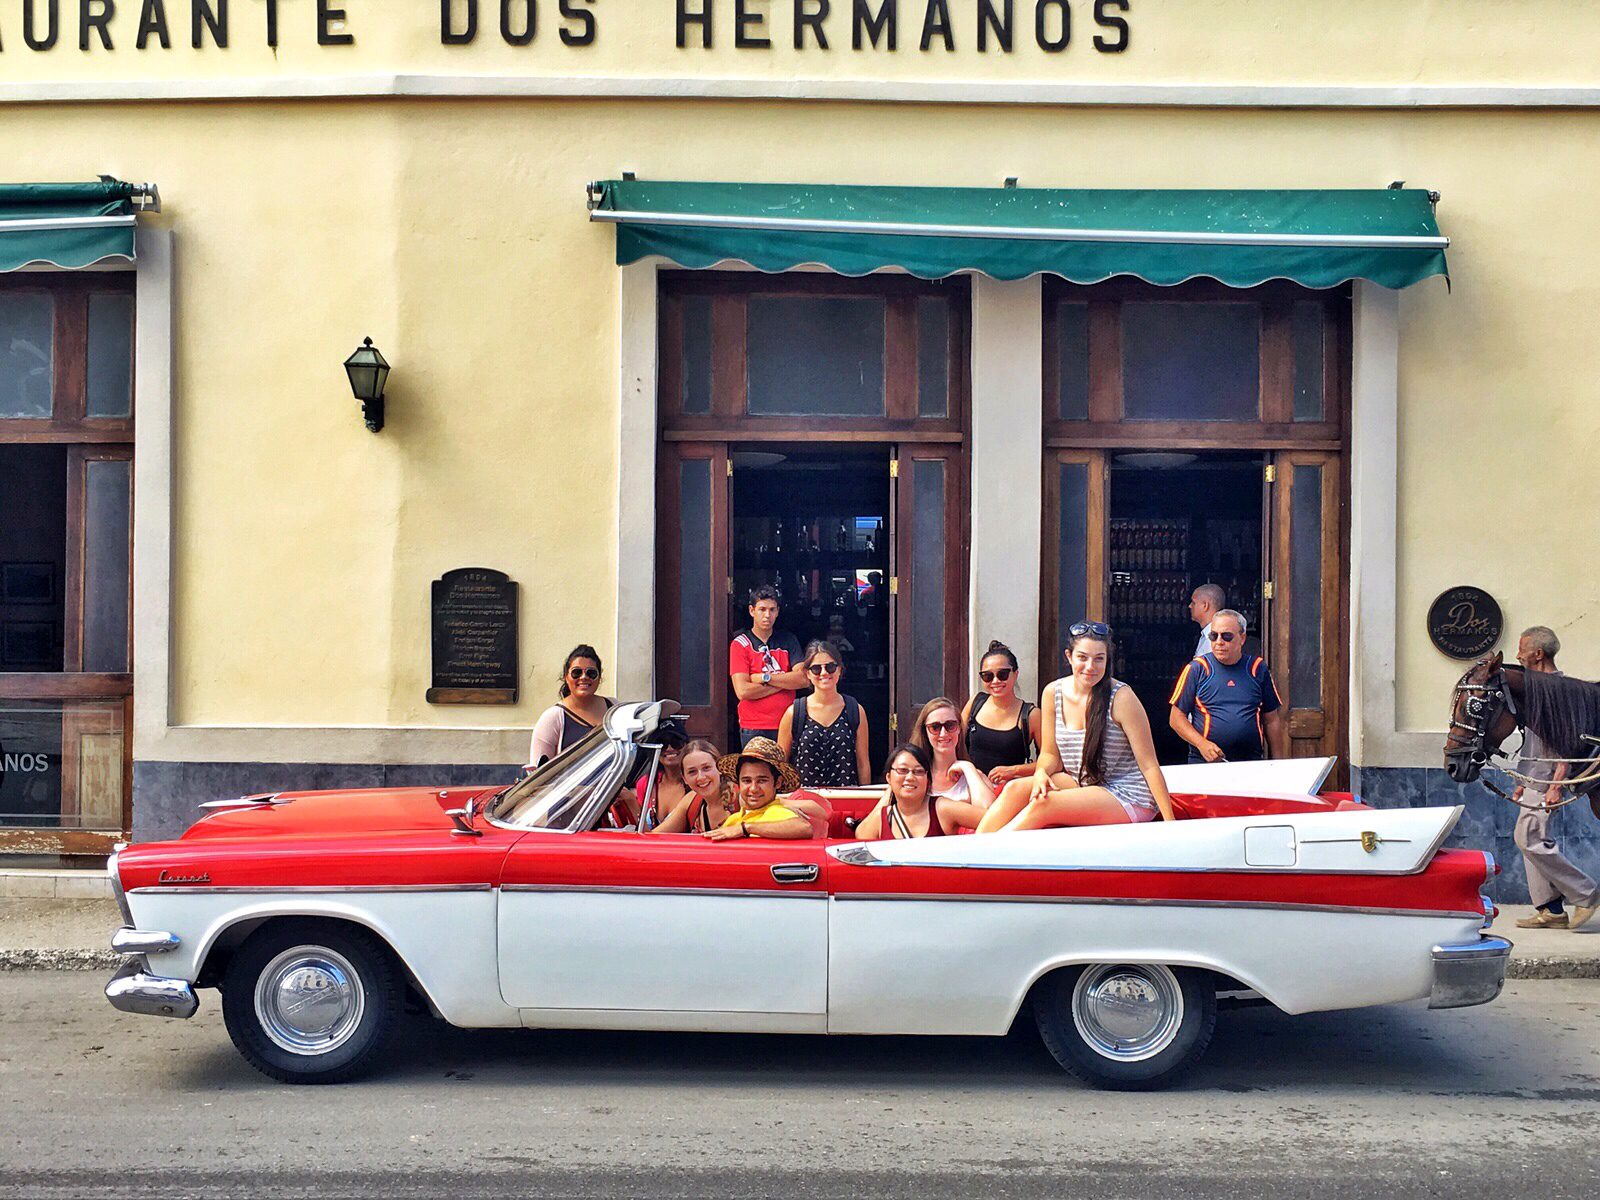 Cuba’s Changing Tourism Industry